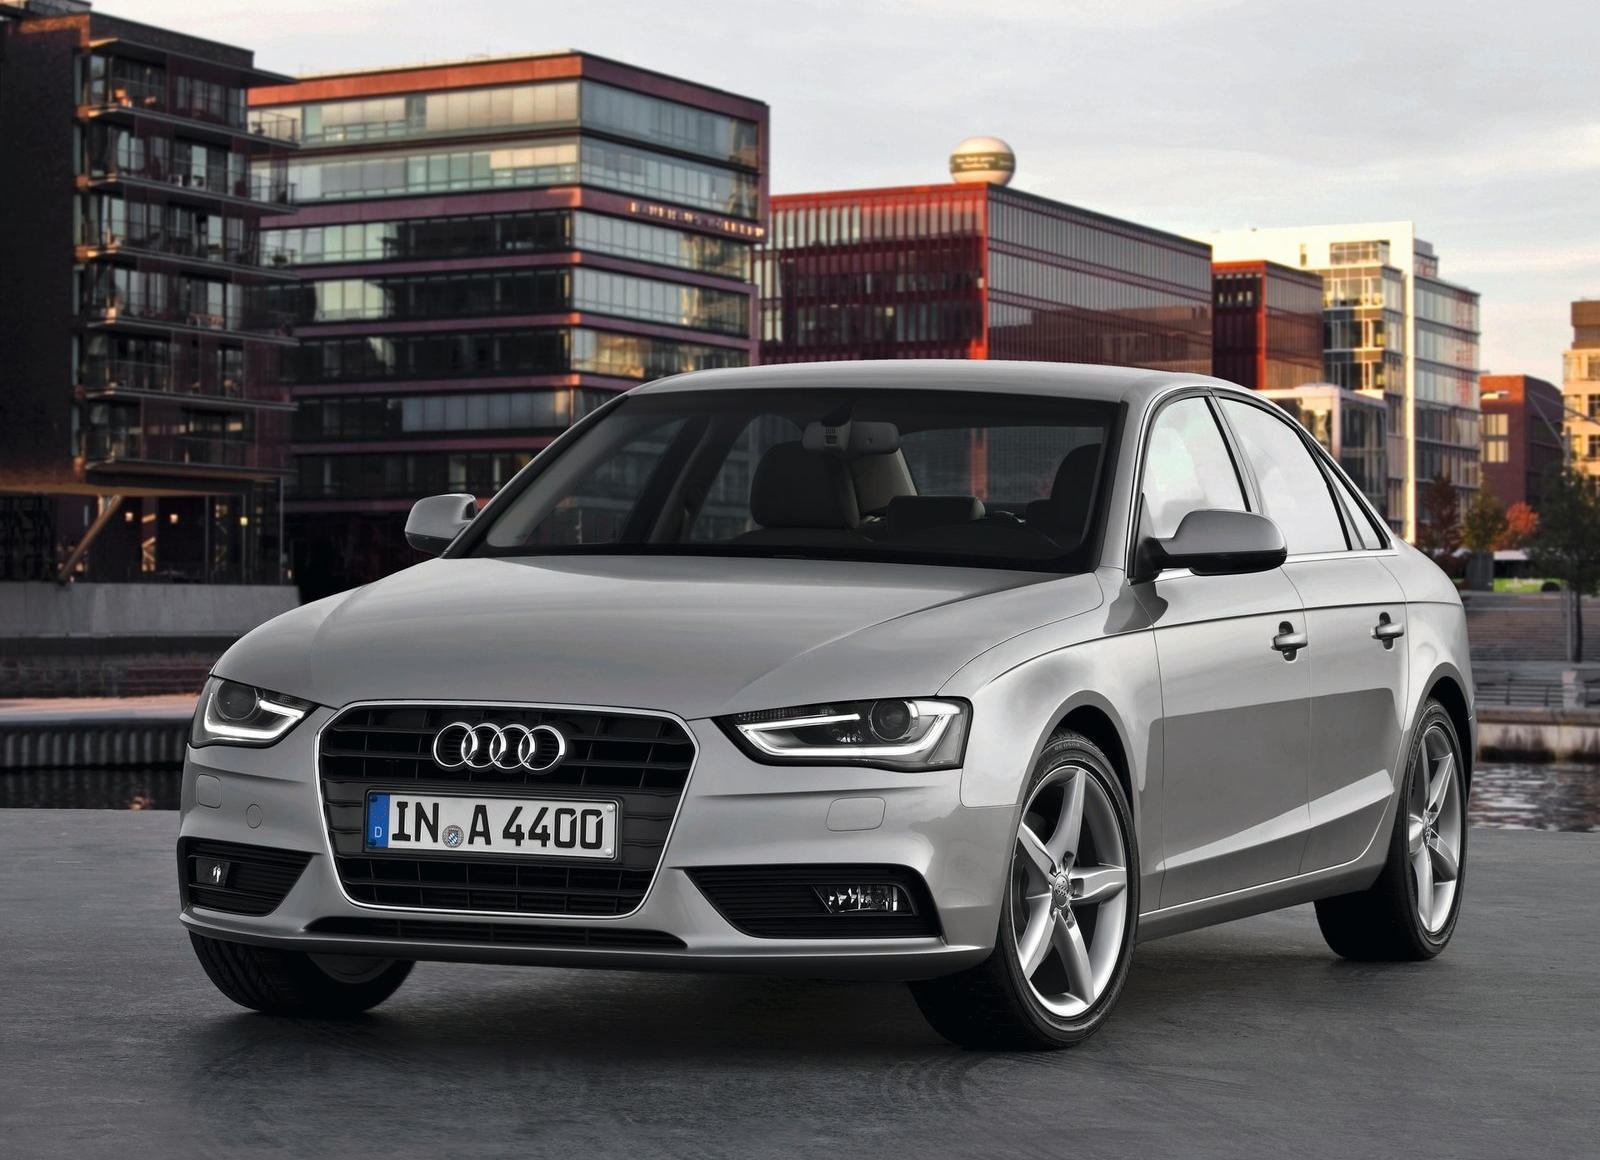 2015 Audi A4 Prices, Reviews, and Photos - MotorTrend